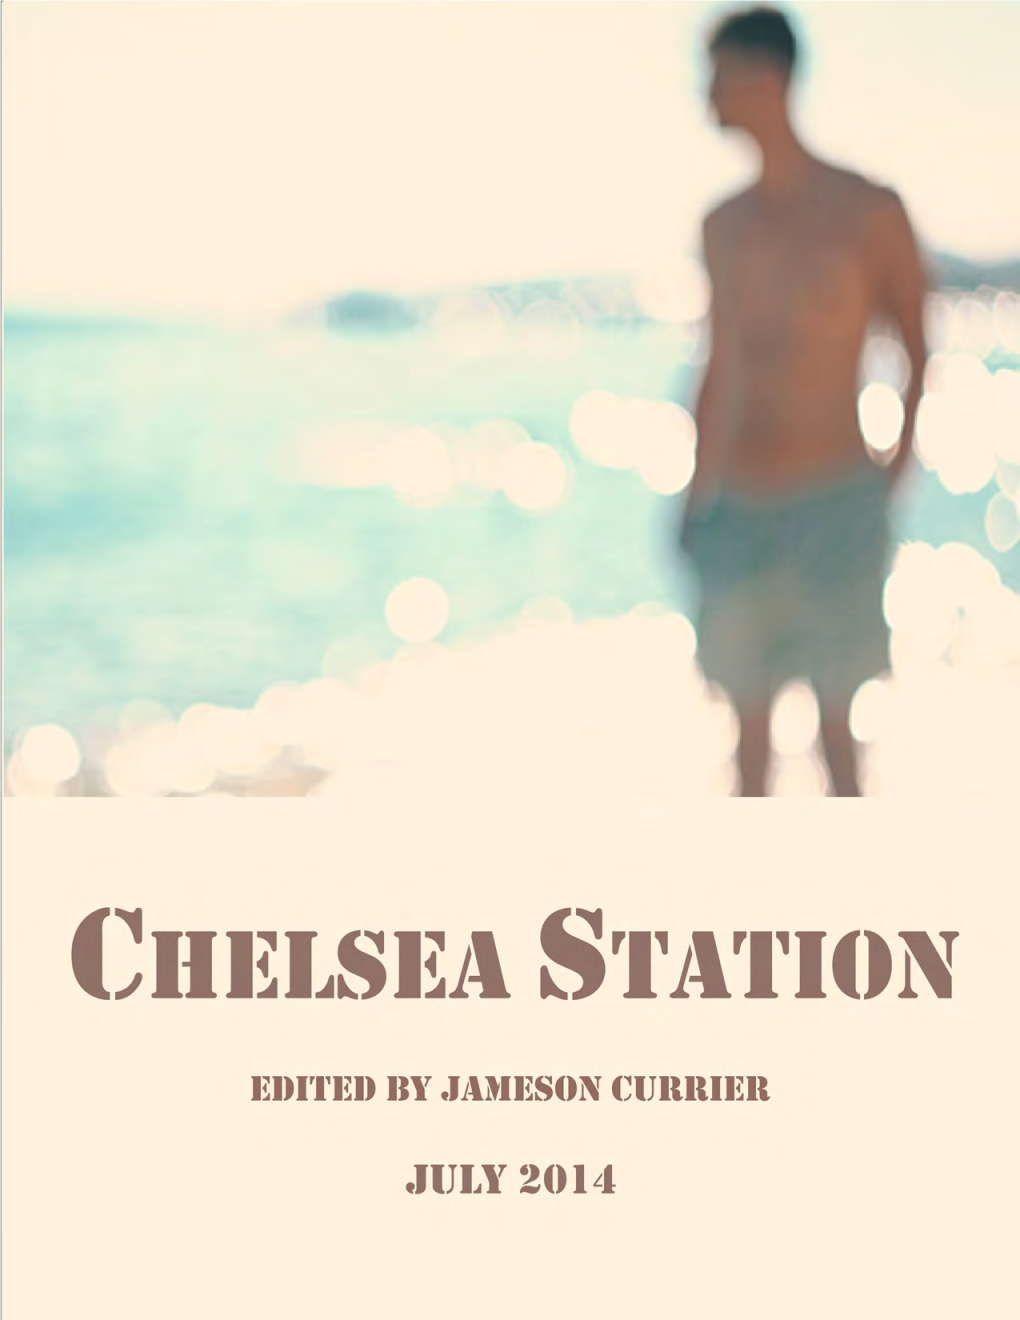 July 2014 Chelsea Station Edited by Jameson Currier